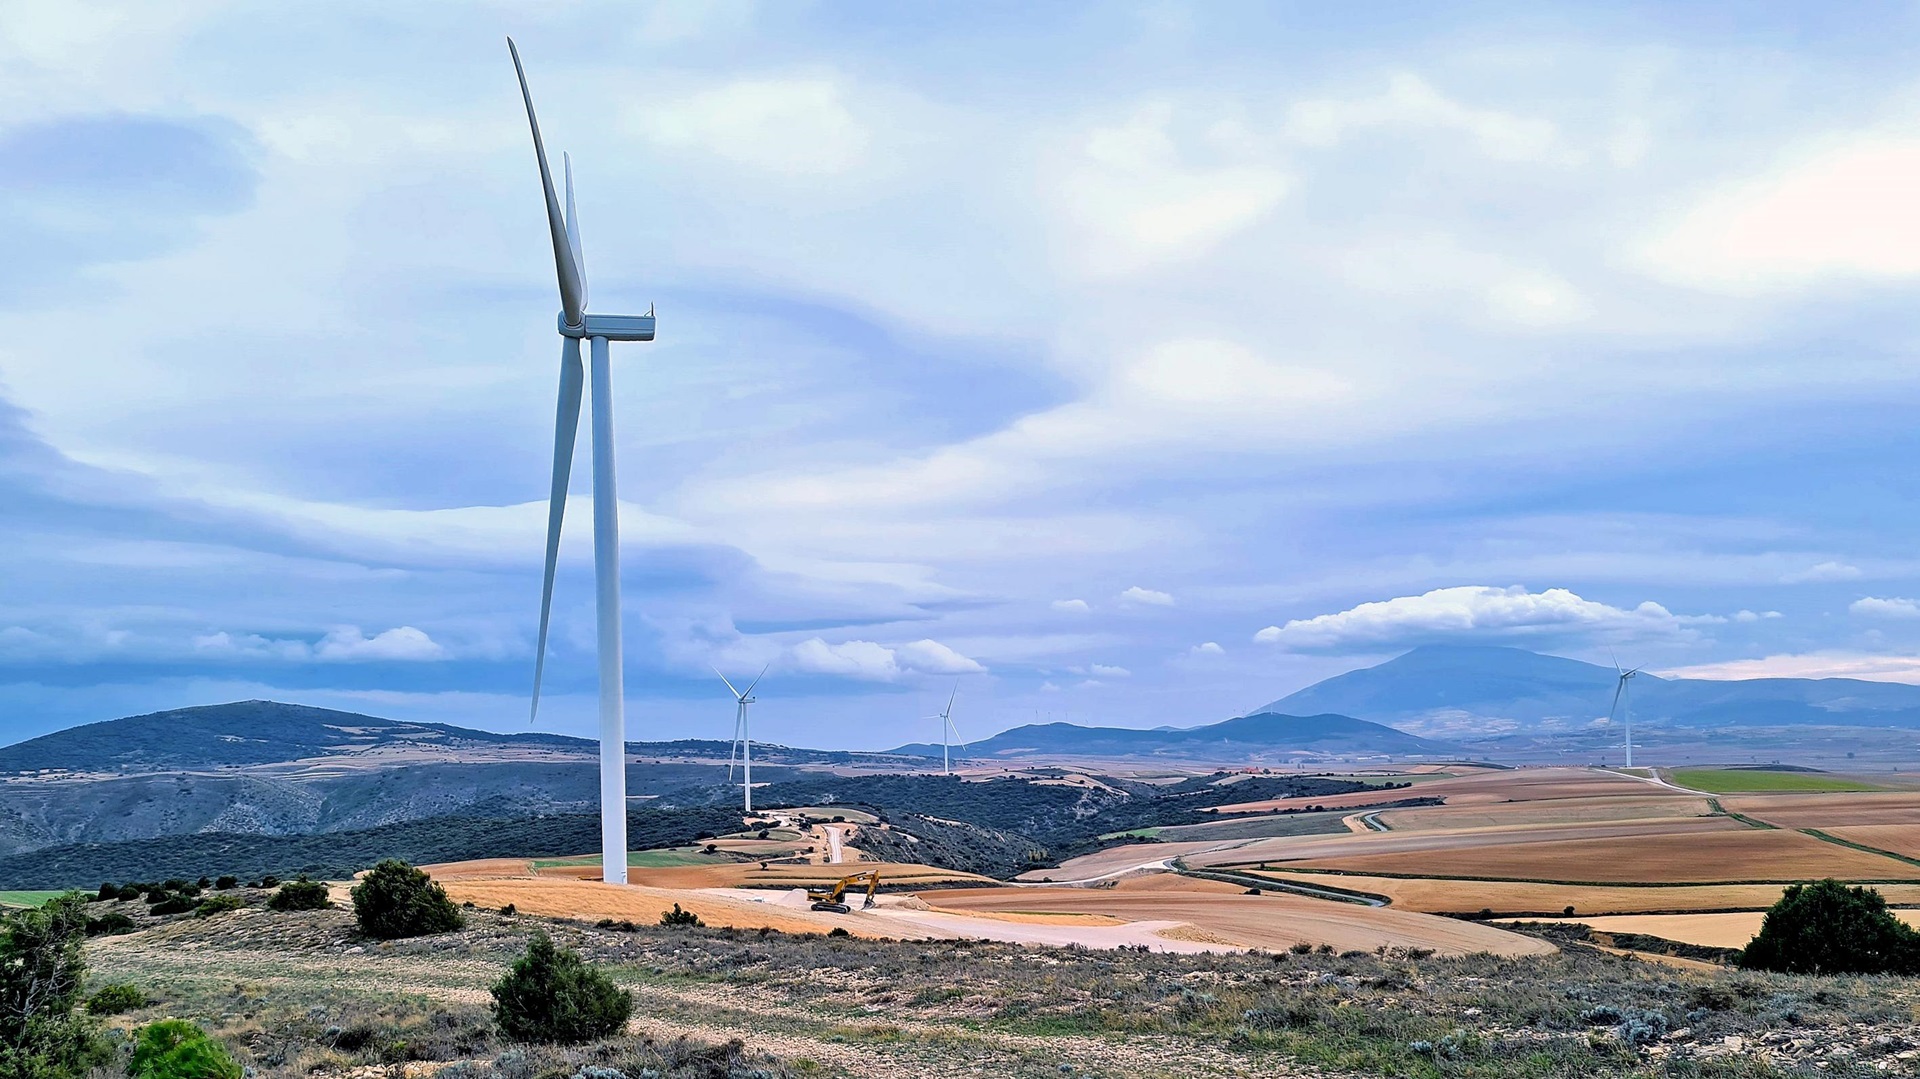 Green growth in Spain: RWE commissions Rea Unificado wind farm with innovative foundations 